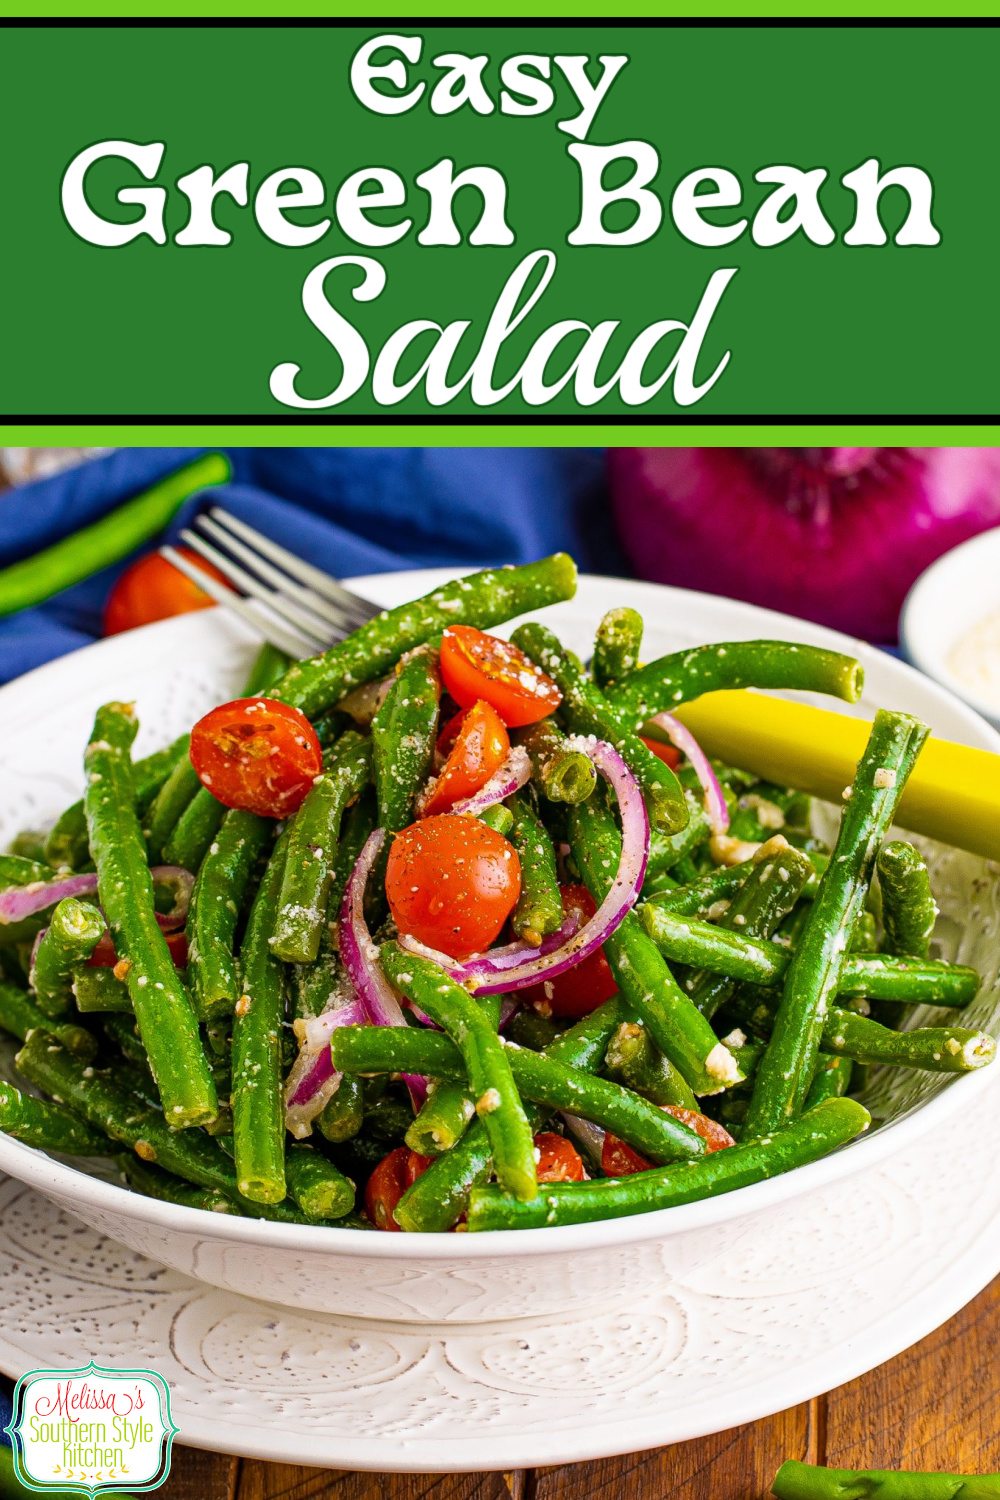 This fresh Green Bean Salad recipe is a spectacular side dish option for the holidays, backyard picnics and potluck parties #greenbeans #greenbeansalad #saladrecipes #southerngreenbeans #easysaladrecipes #vegetarianrecipes #greenbeanrecipes